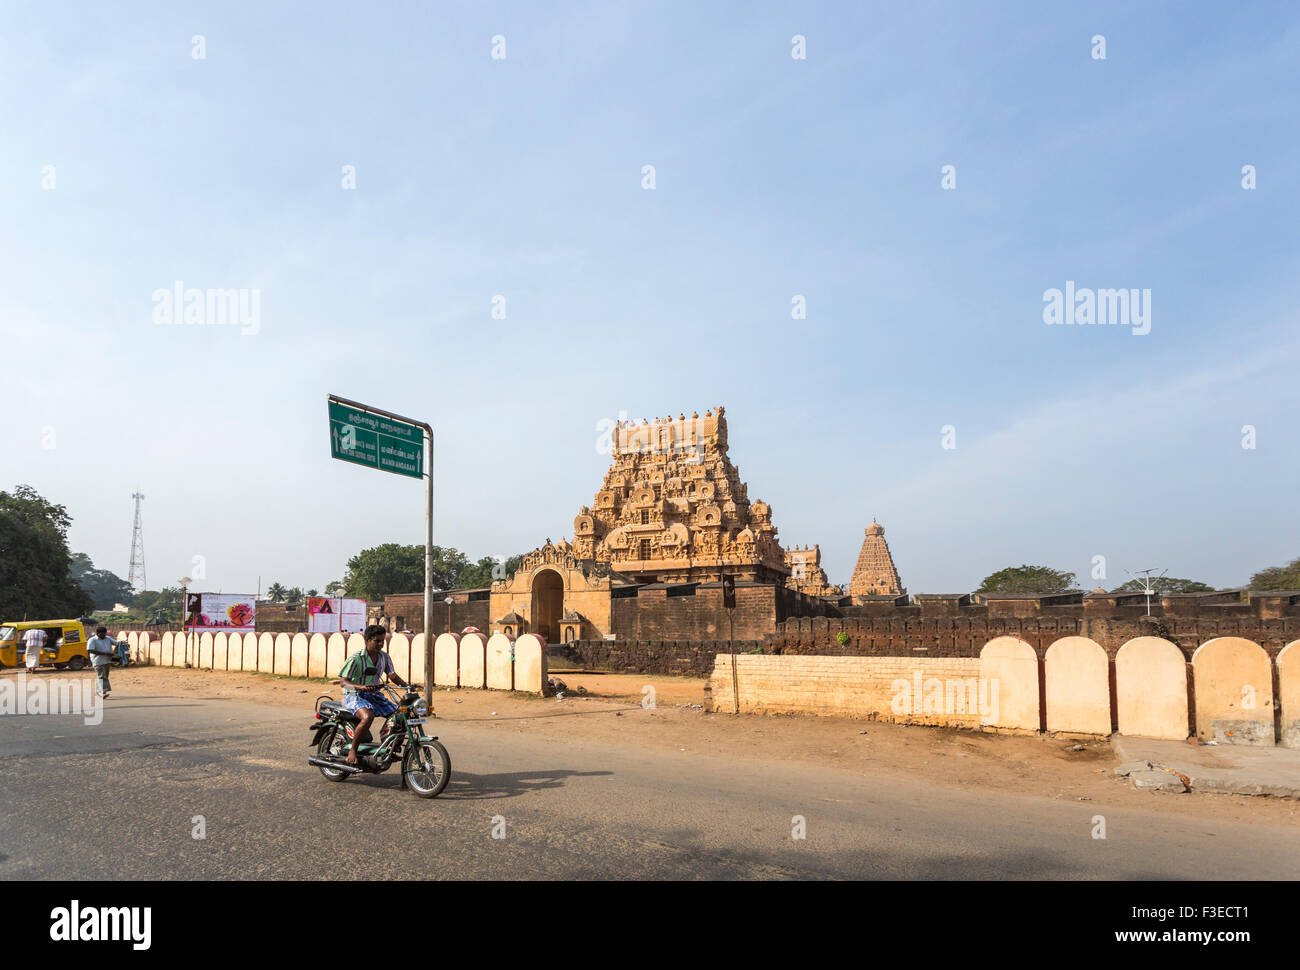 Street scene: typical Hindu temple on the roadside near Chettinad, Tamil Nadu, southern India on a sunny day with blue sky, local man riding on moped Stock Photo